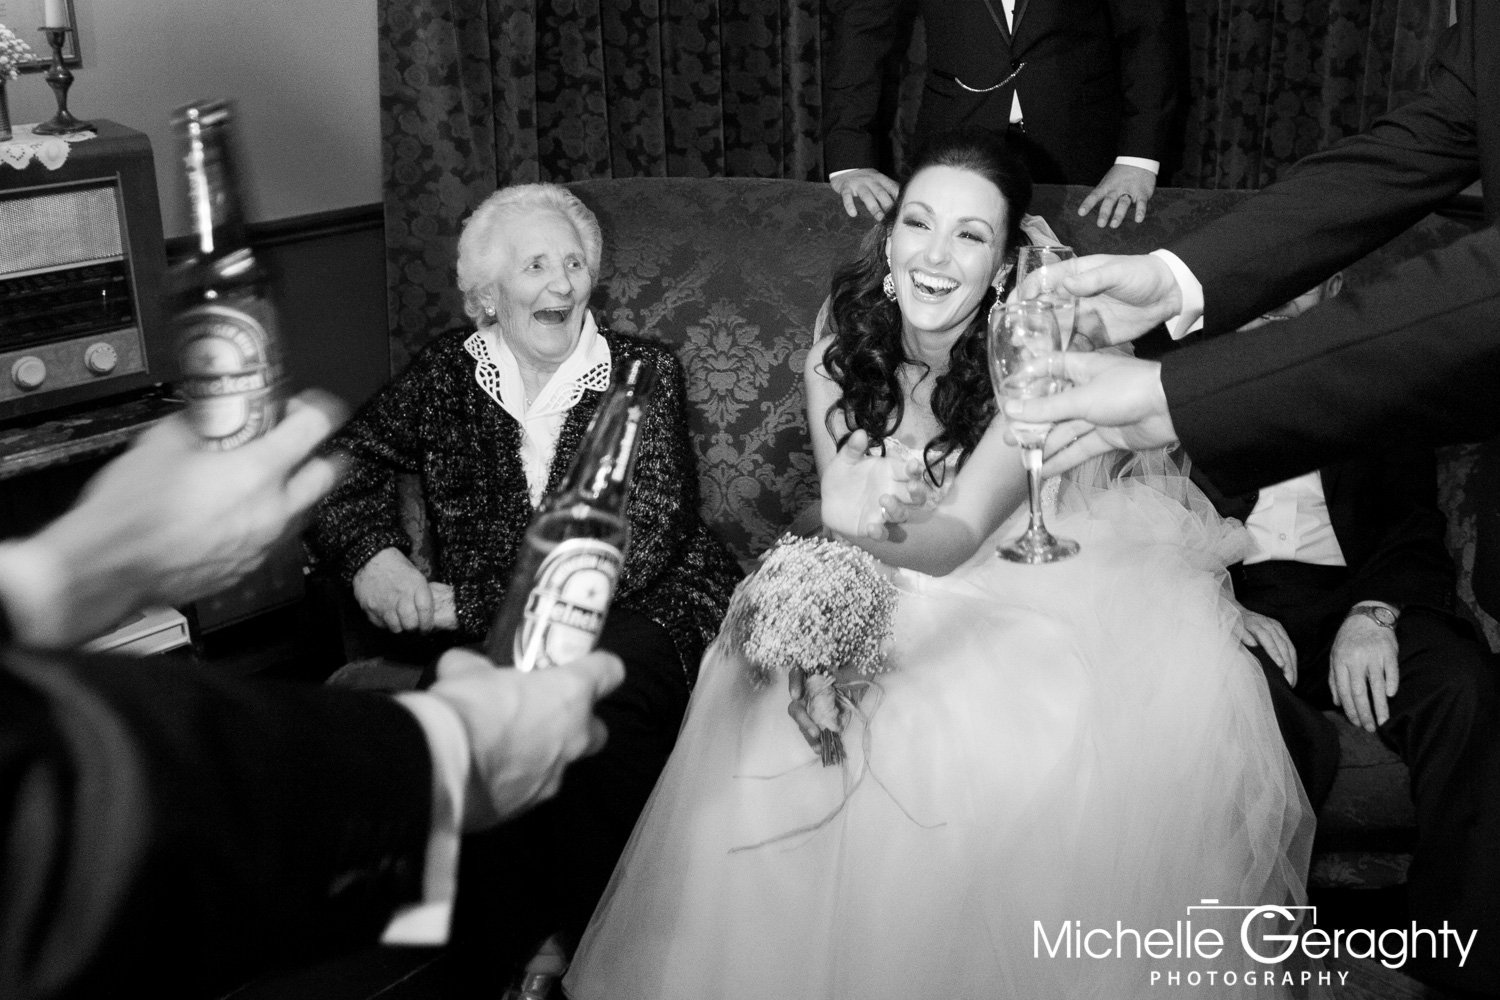 1713-Michelle Geraghty Photography_Mary & Connal-IMG_4137.jpg